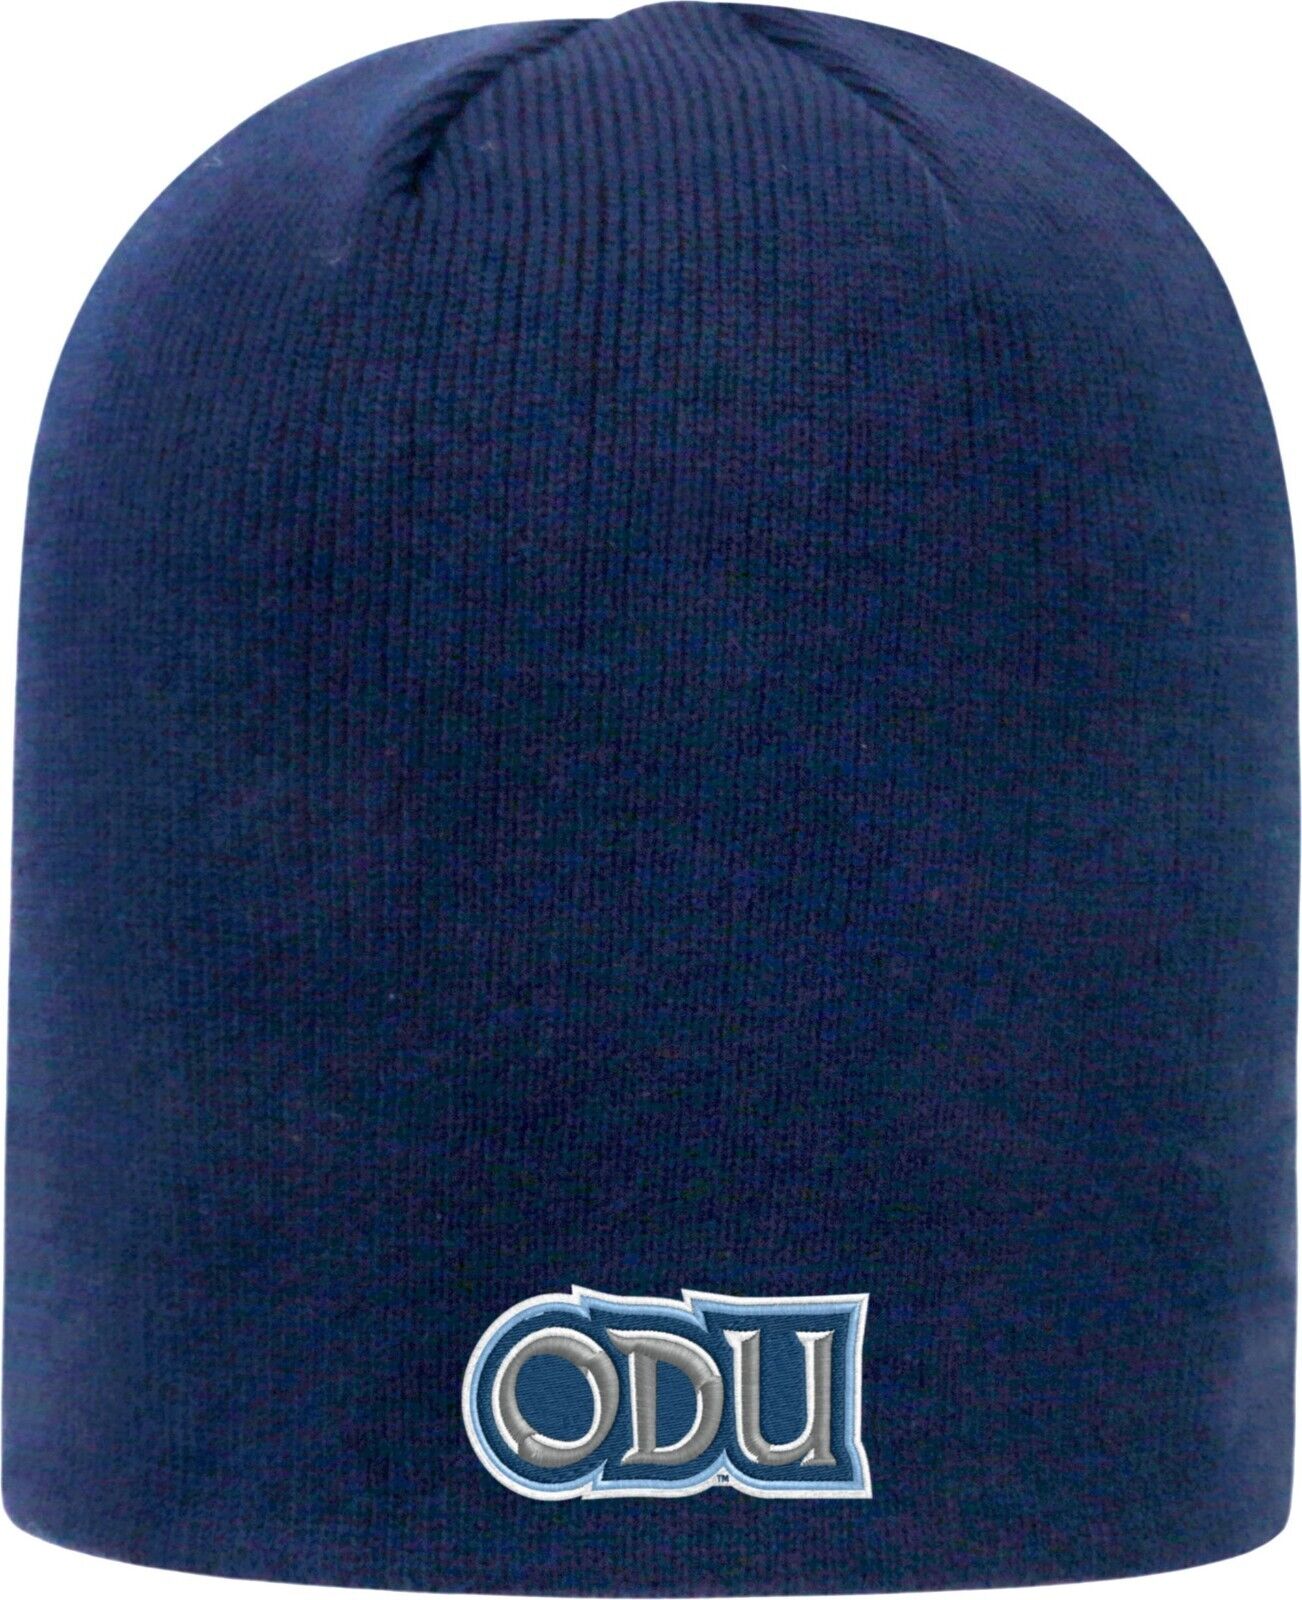 Old Dominion Monarchs Blue Top Of the World Classic Knit Cuffless Bean